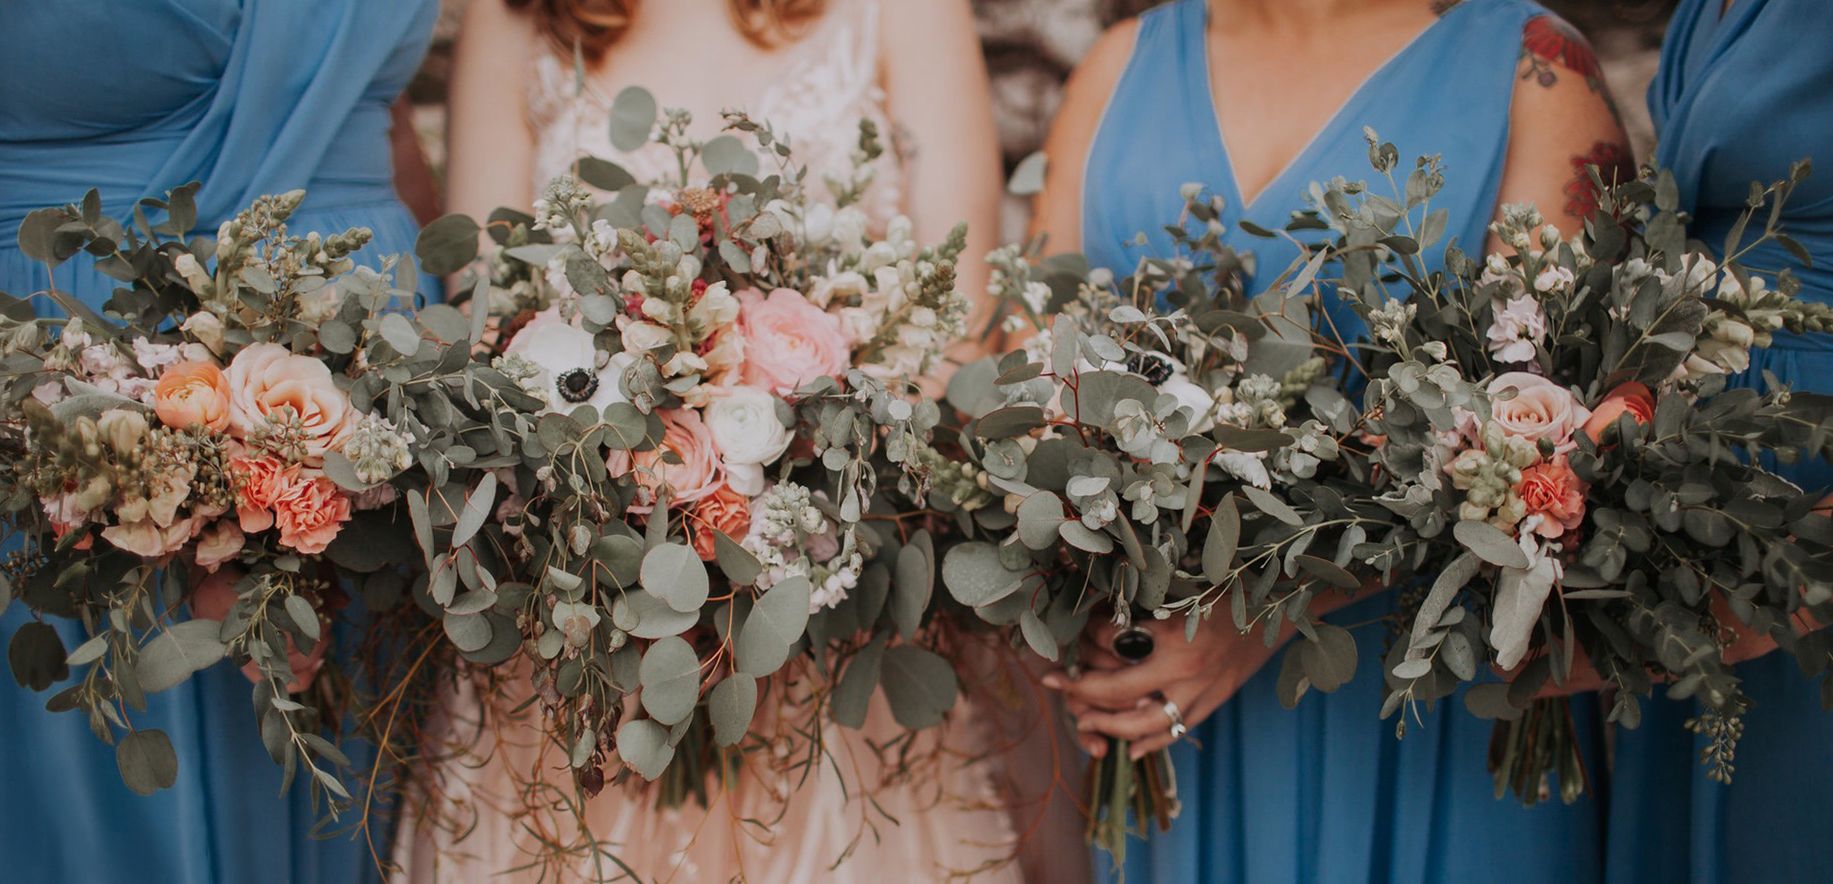 row of bridesmaids with bouquets in pale green and pink